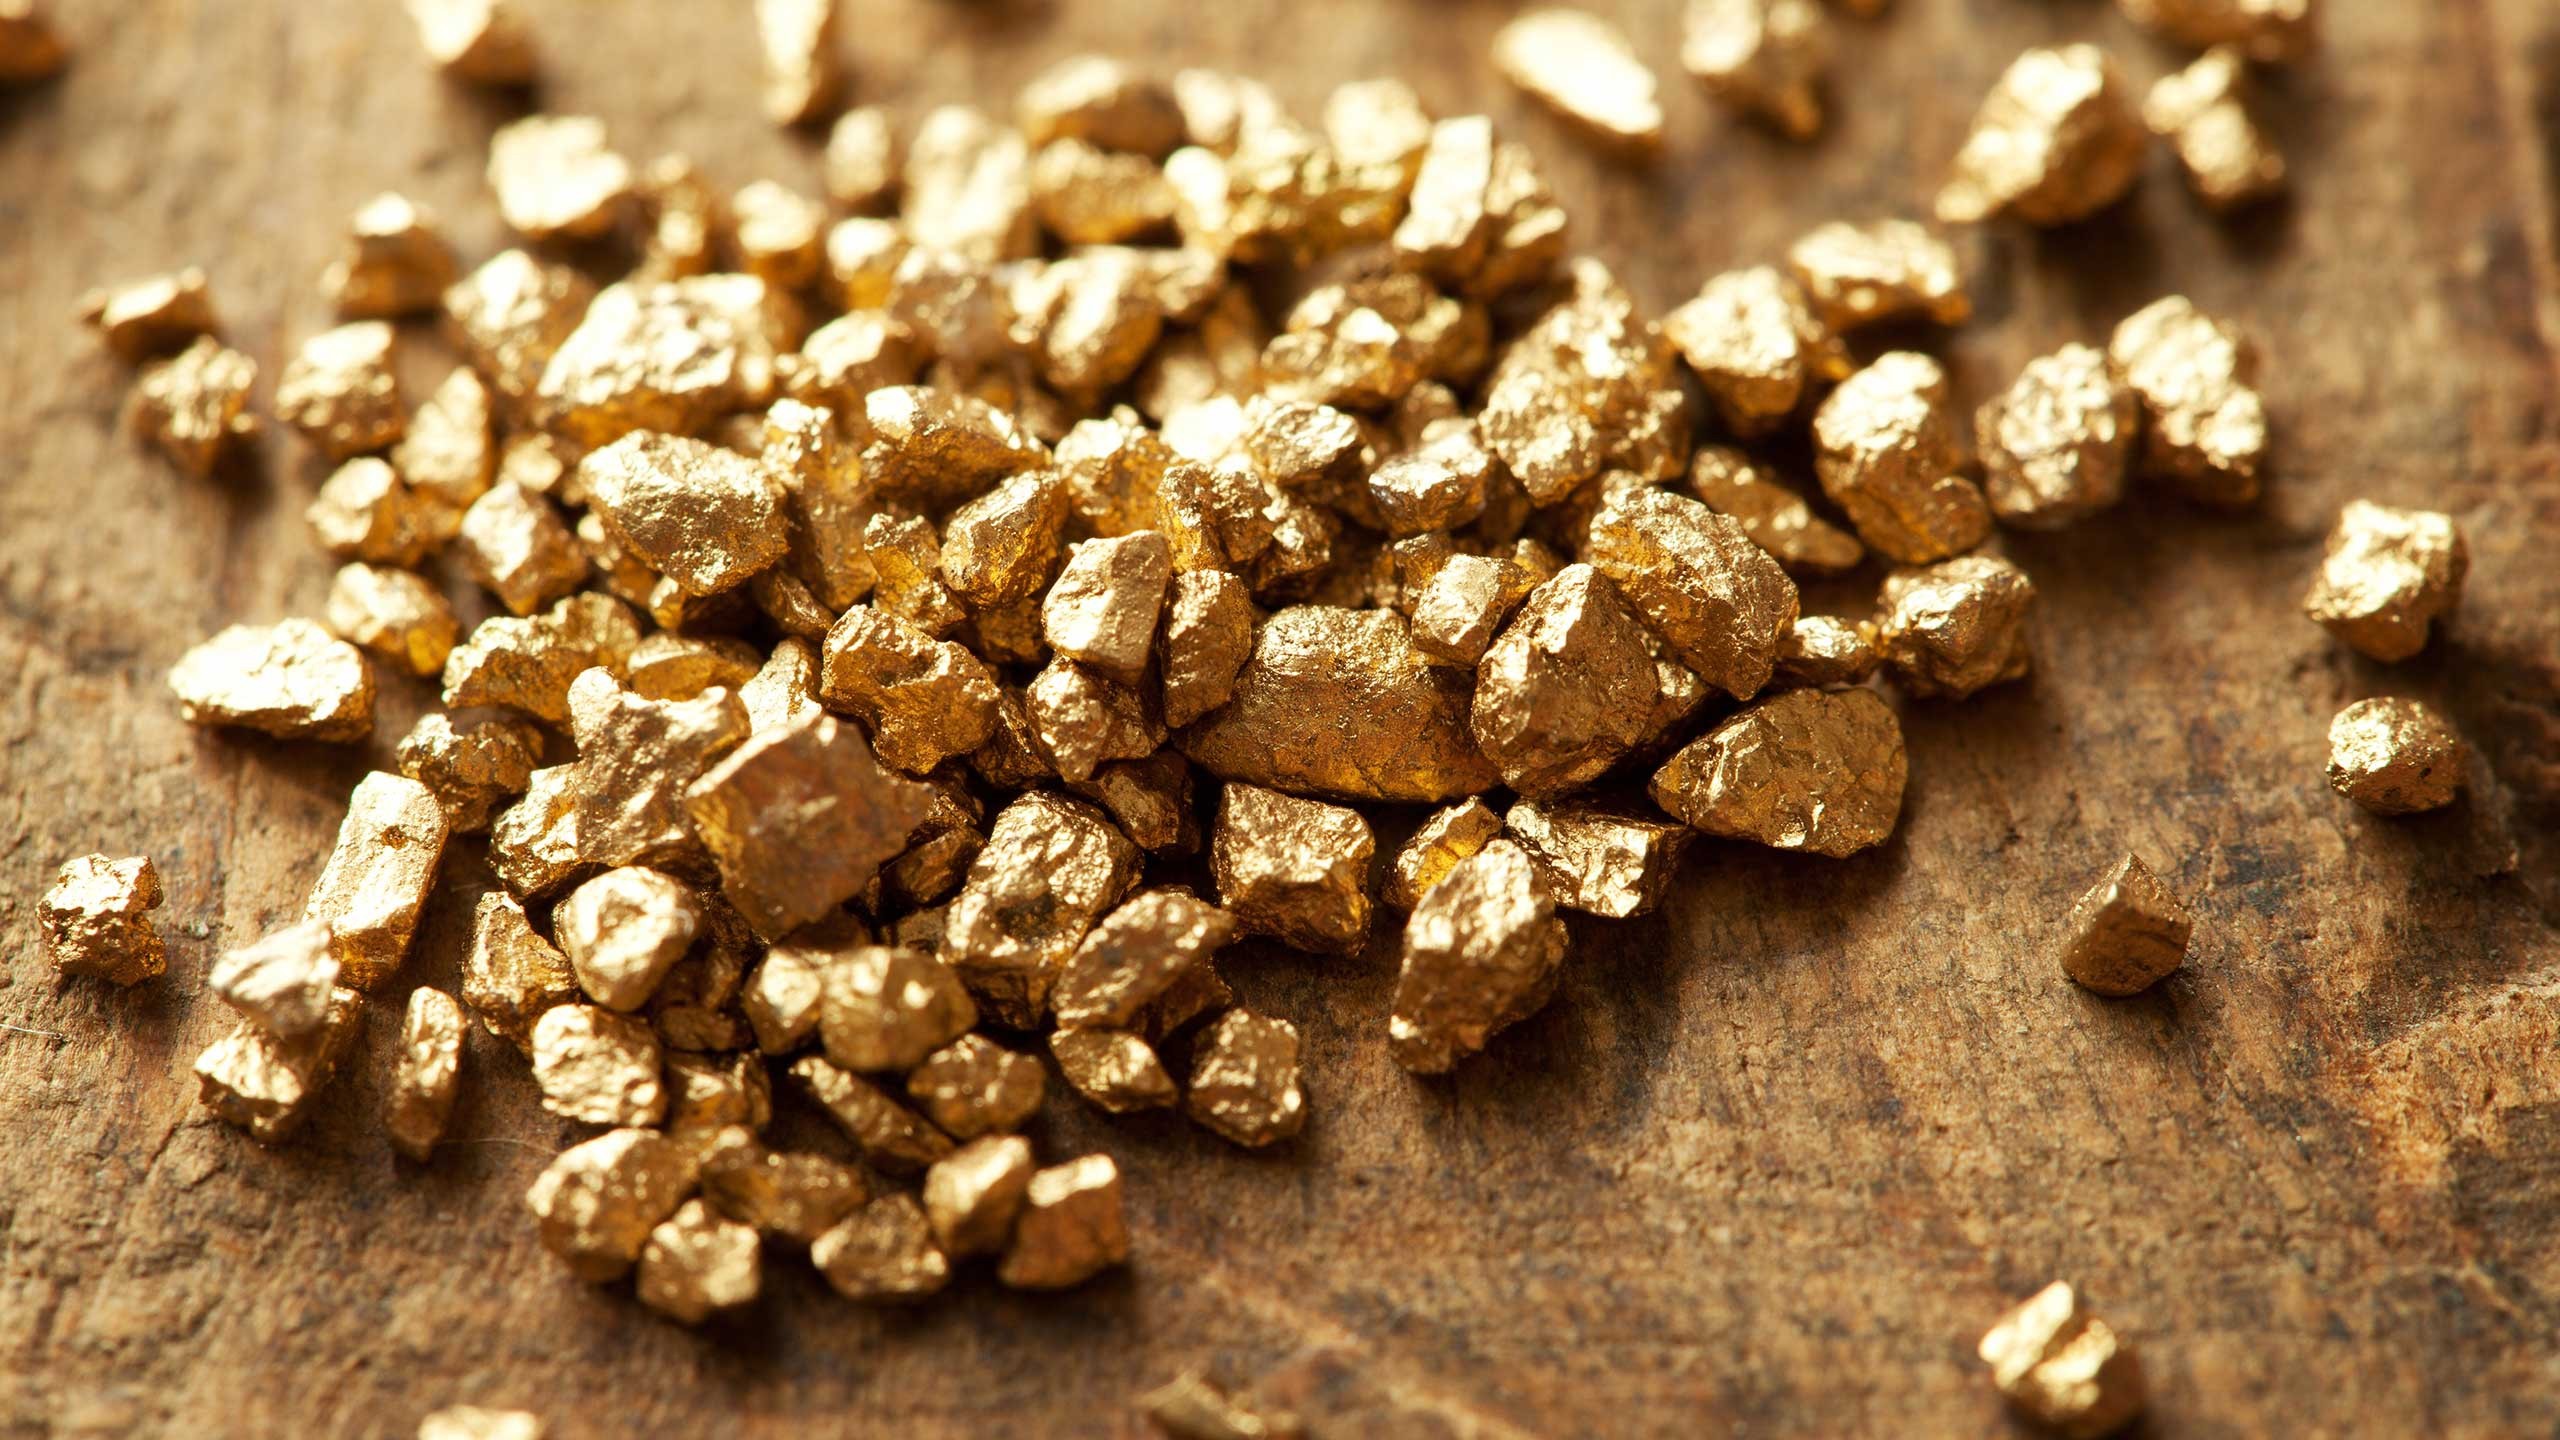 Pile of gold nuggets on wooden table